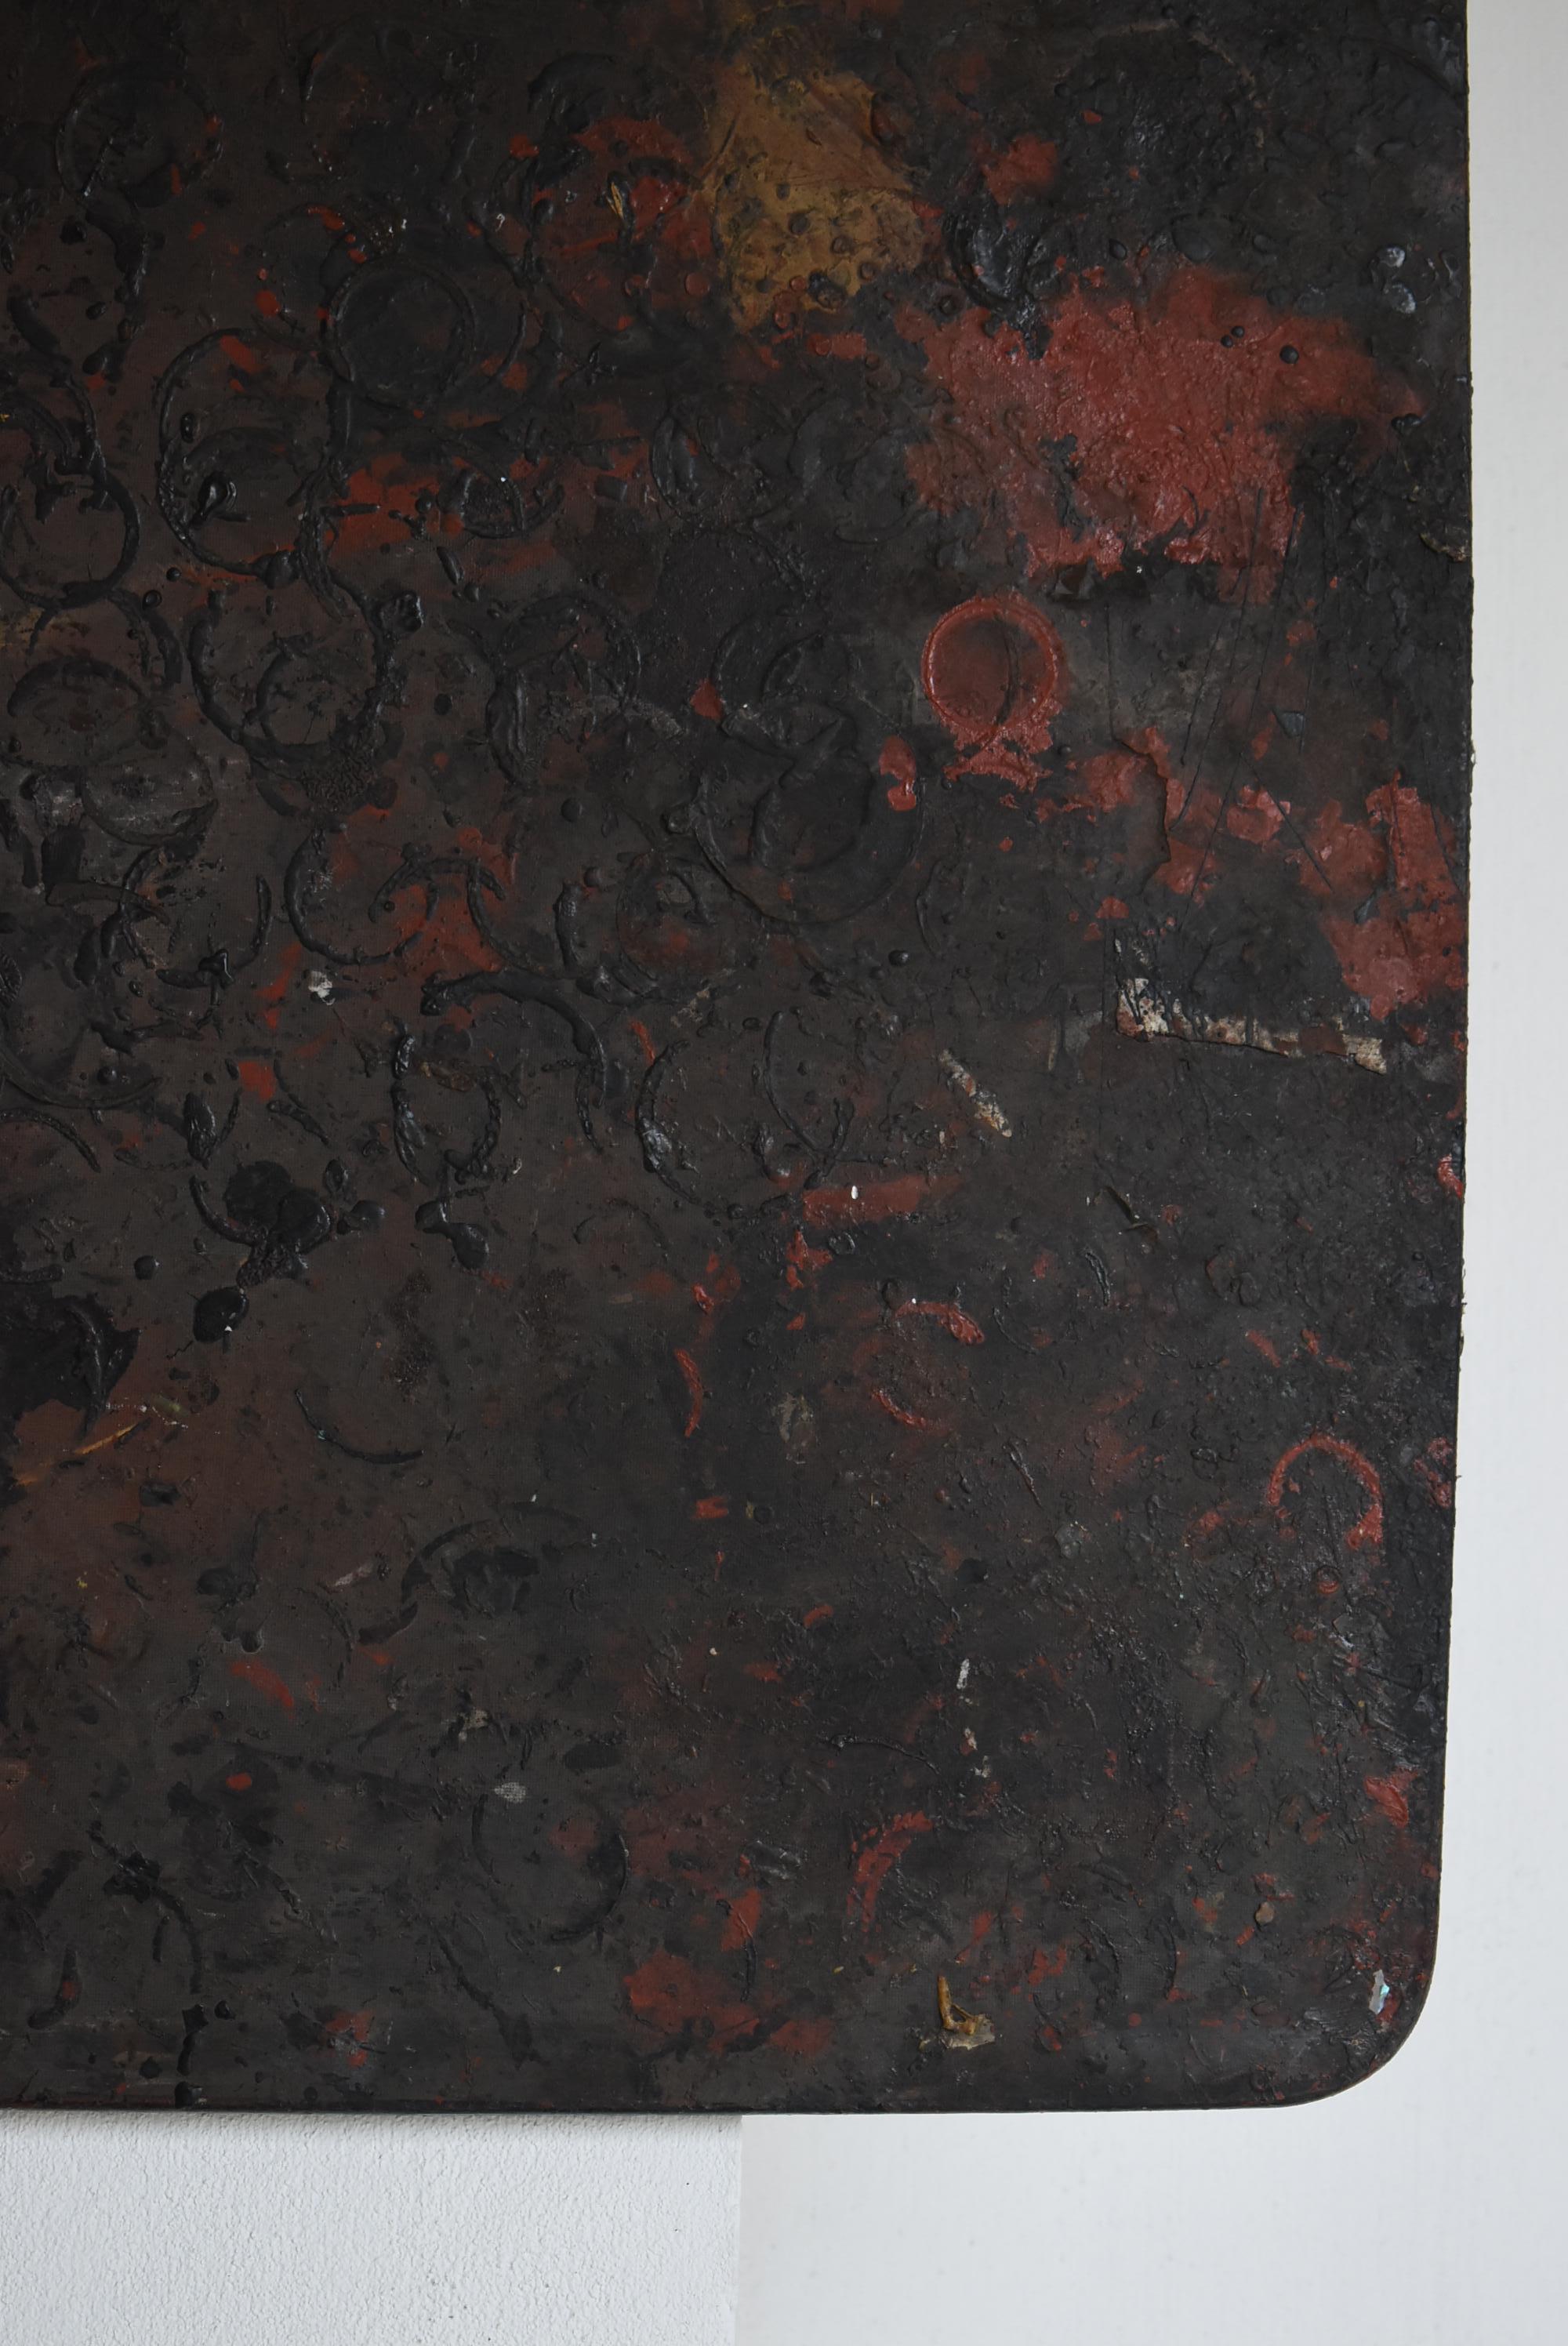 Mid-20th Century Japanese Old Lacquer Work Board 1950s-1970s / Abstract Painting Wabi Sabi